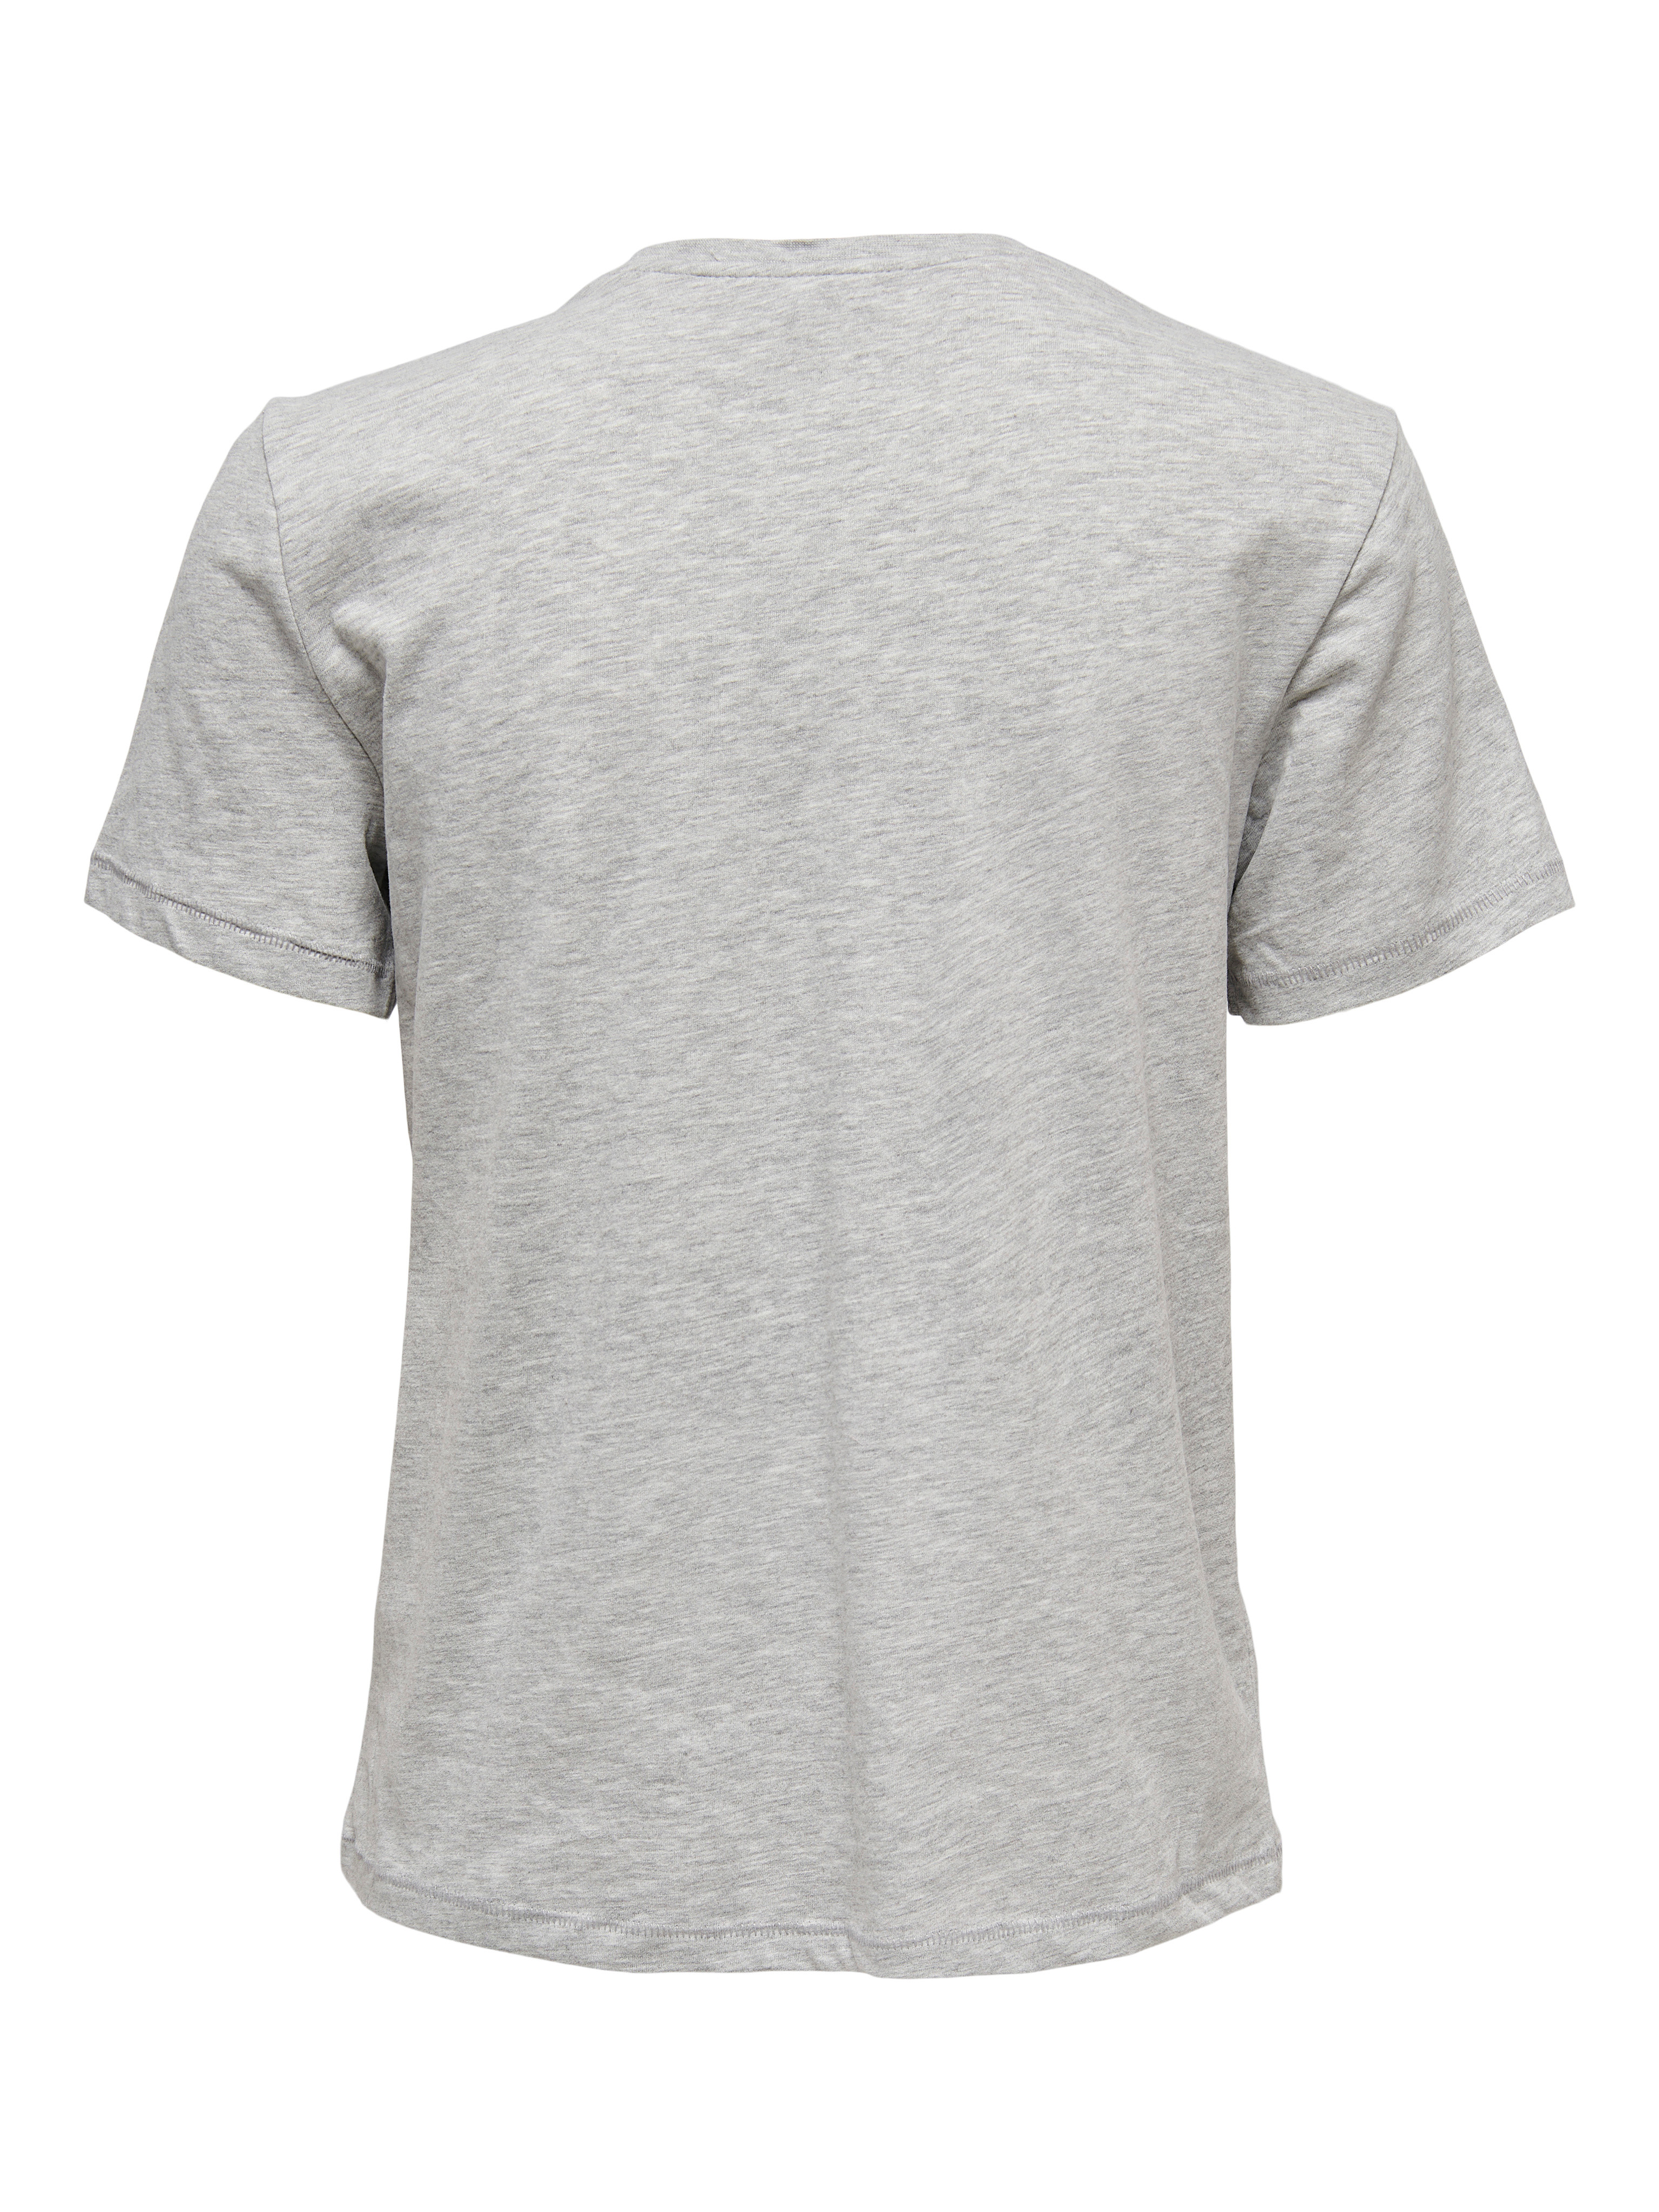 T-shirt con stampa, Grigio, large image number 1